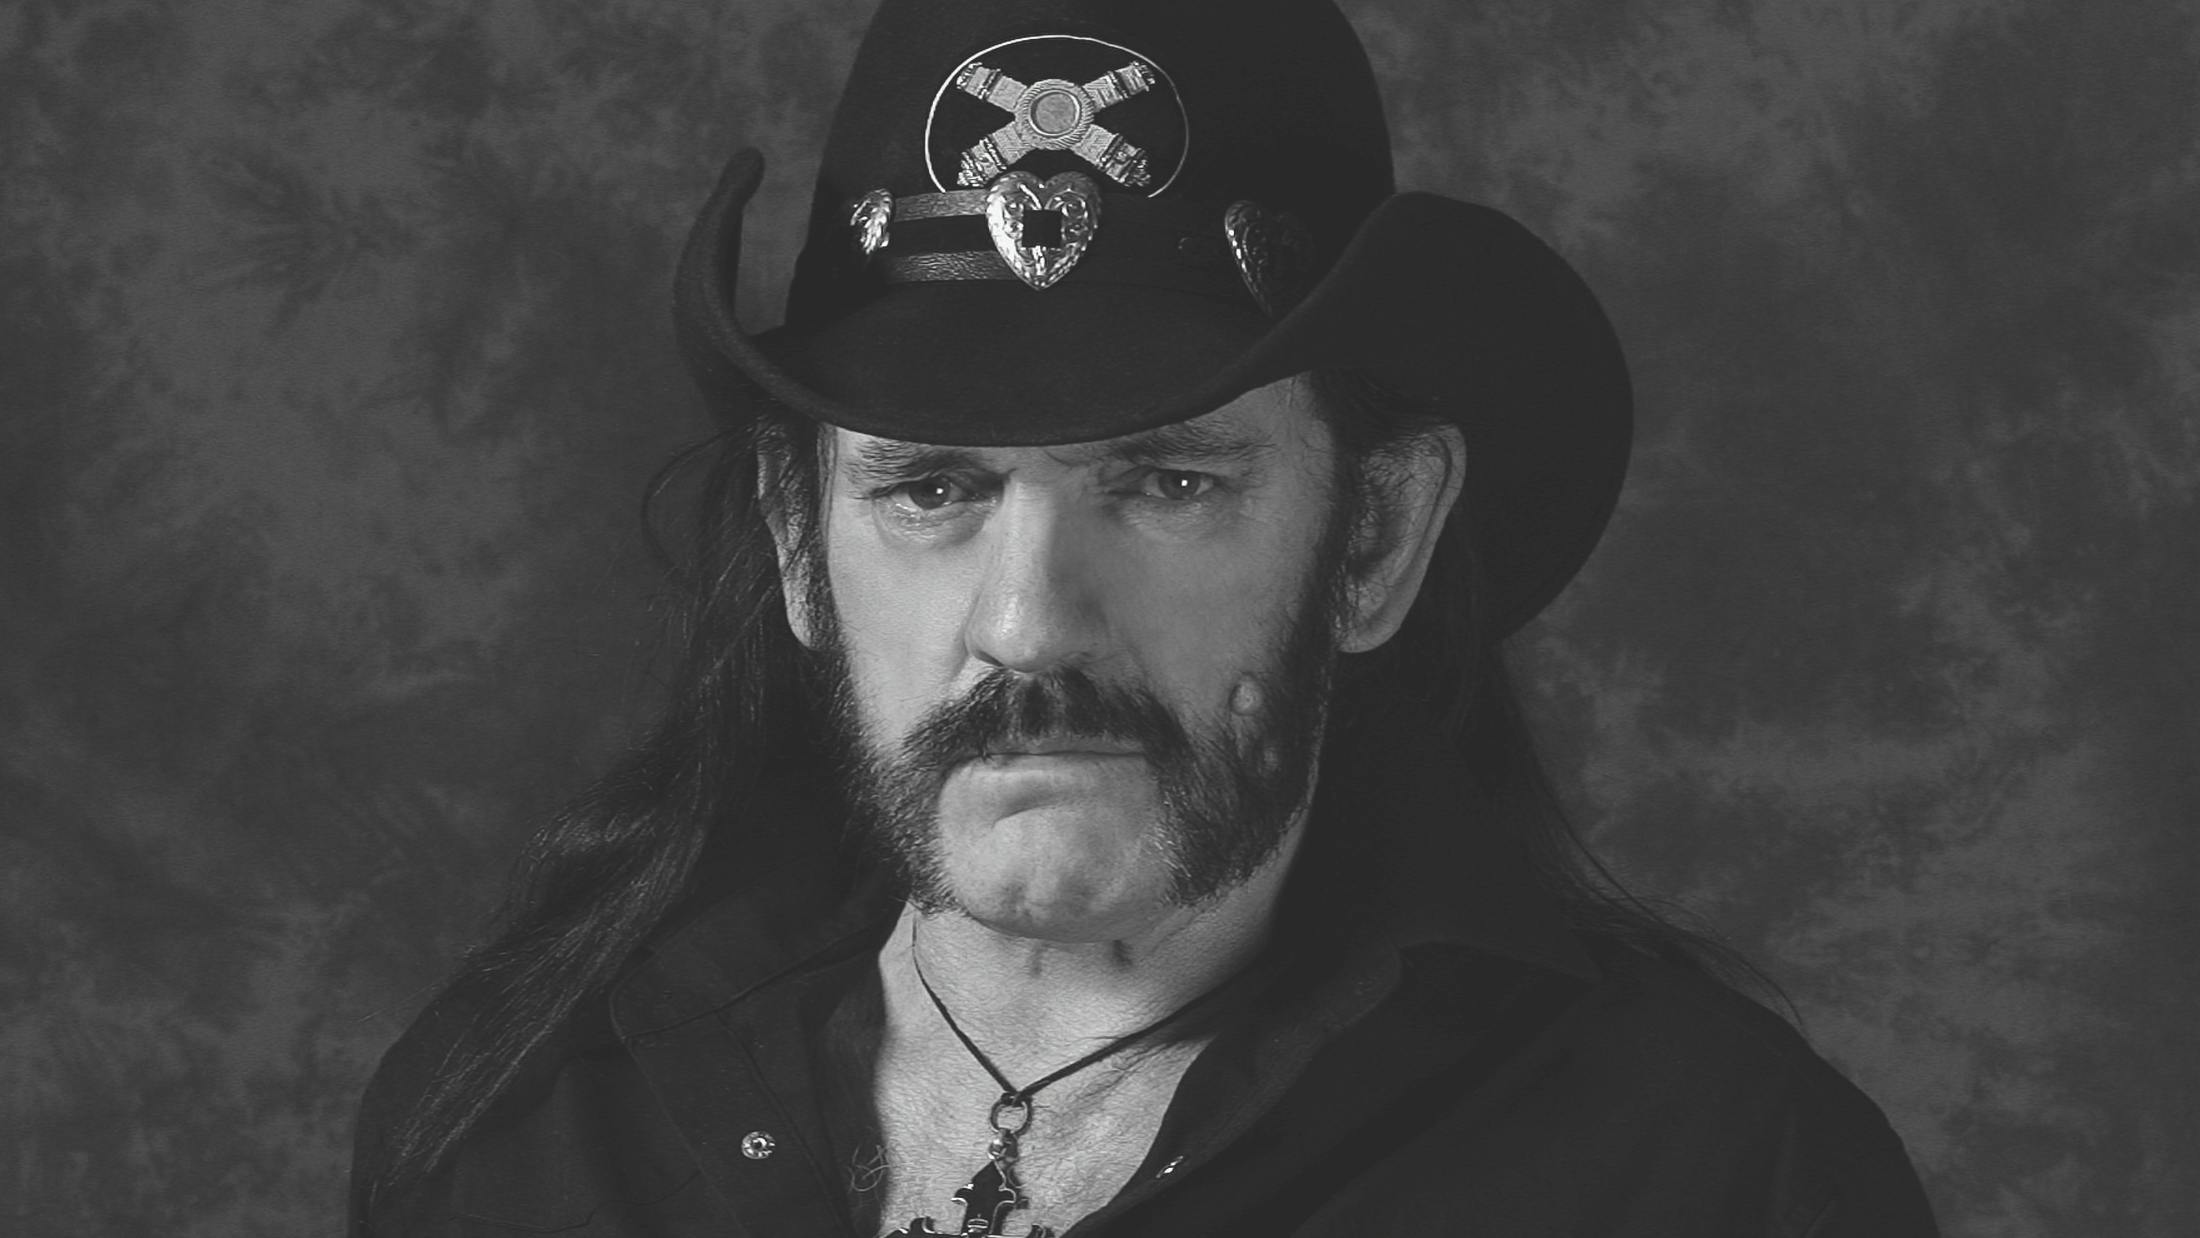 The Day I Met Lemmy